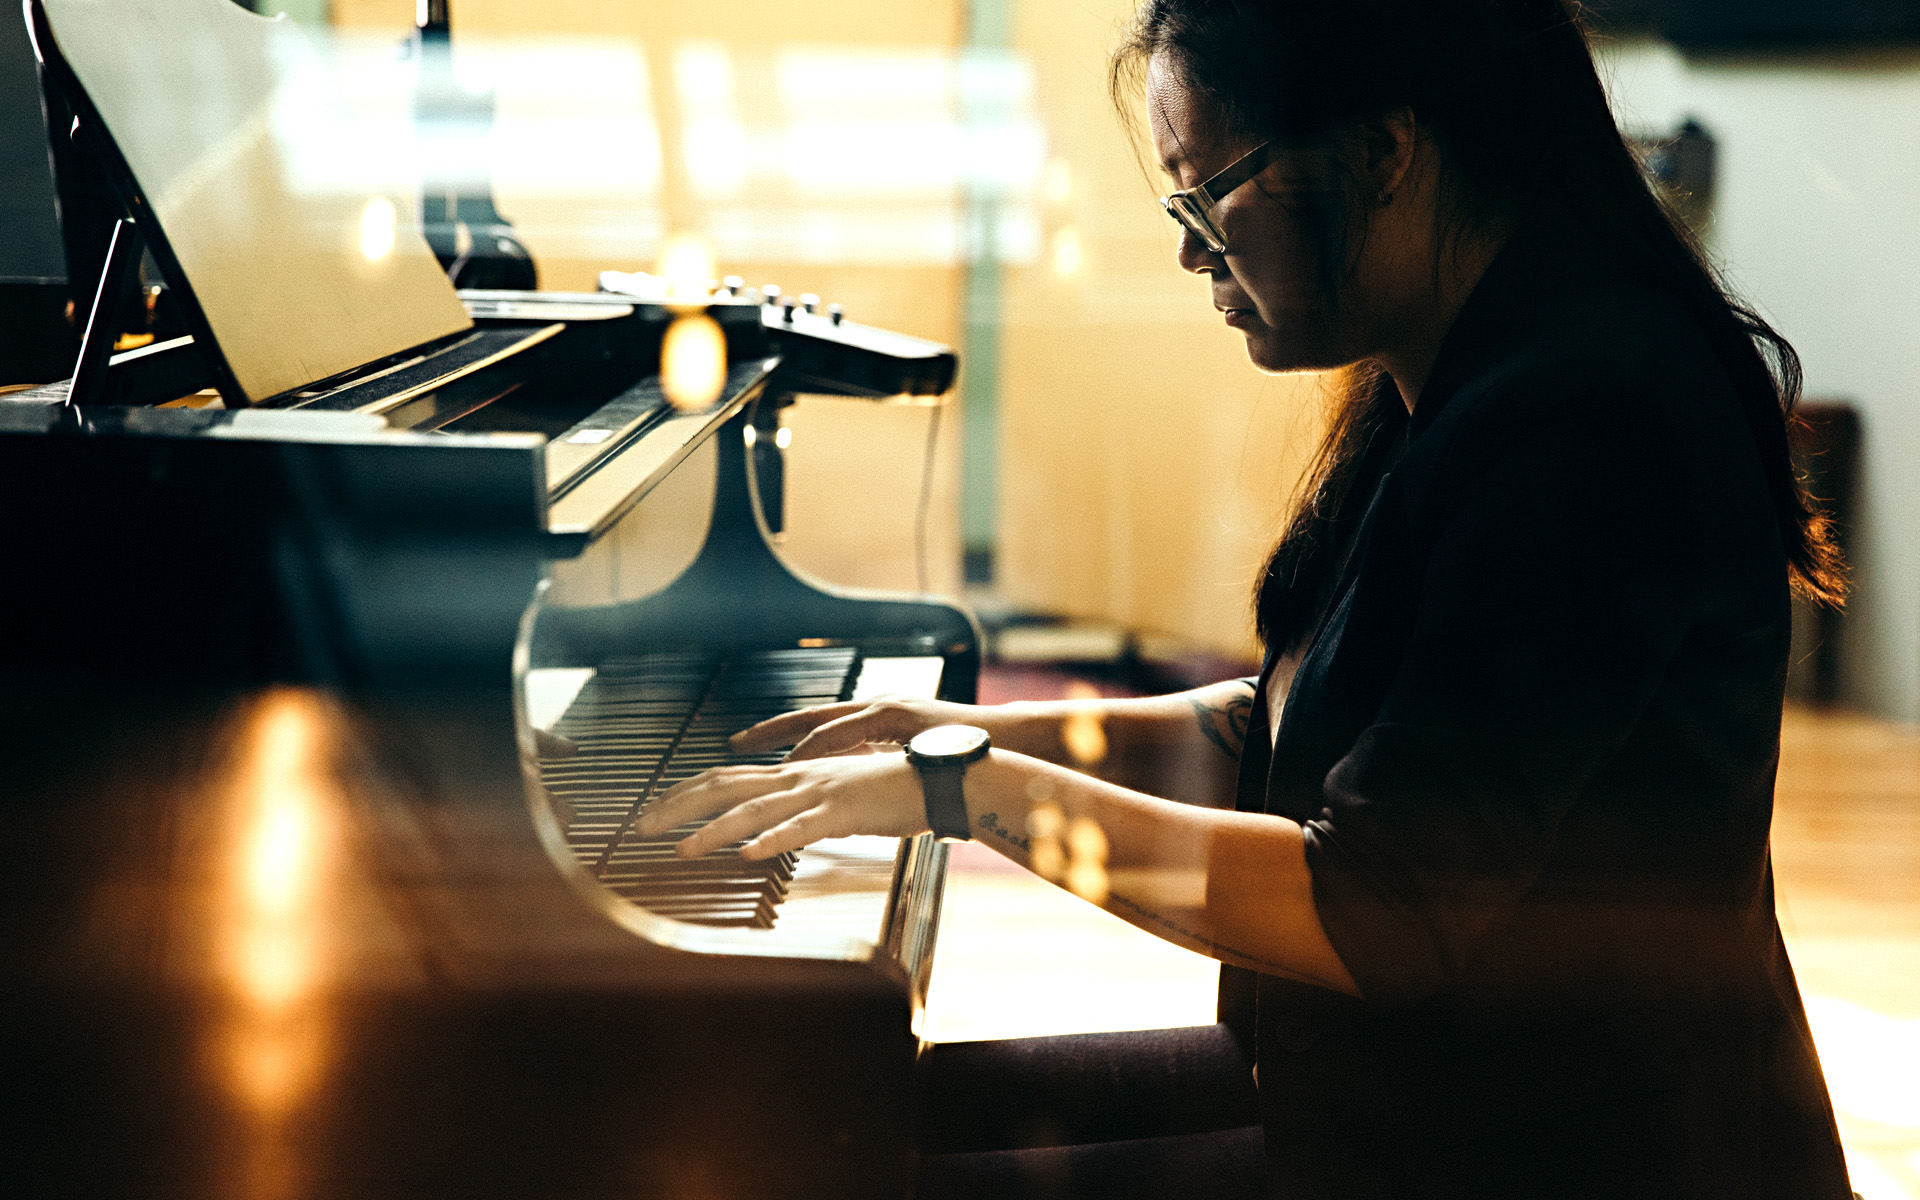 A woman plays piano, hypothetically working out major and minor modal scales.